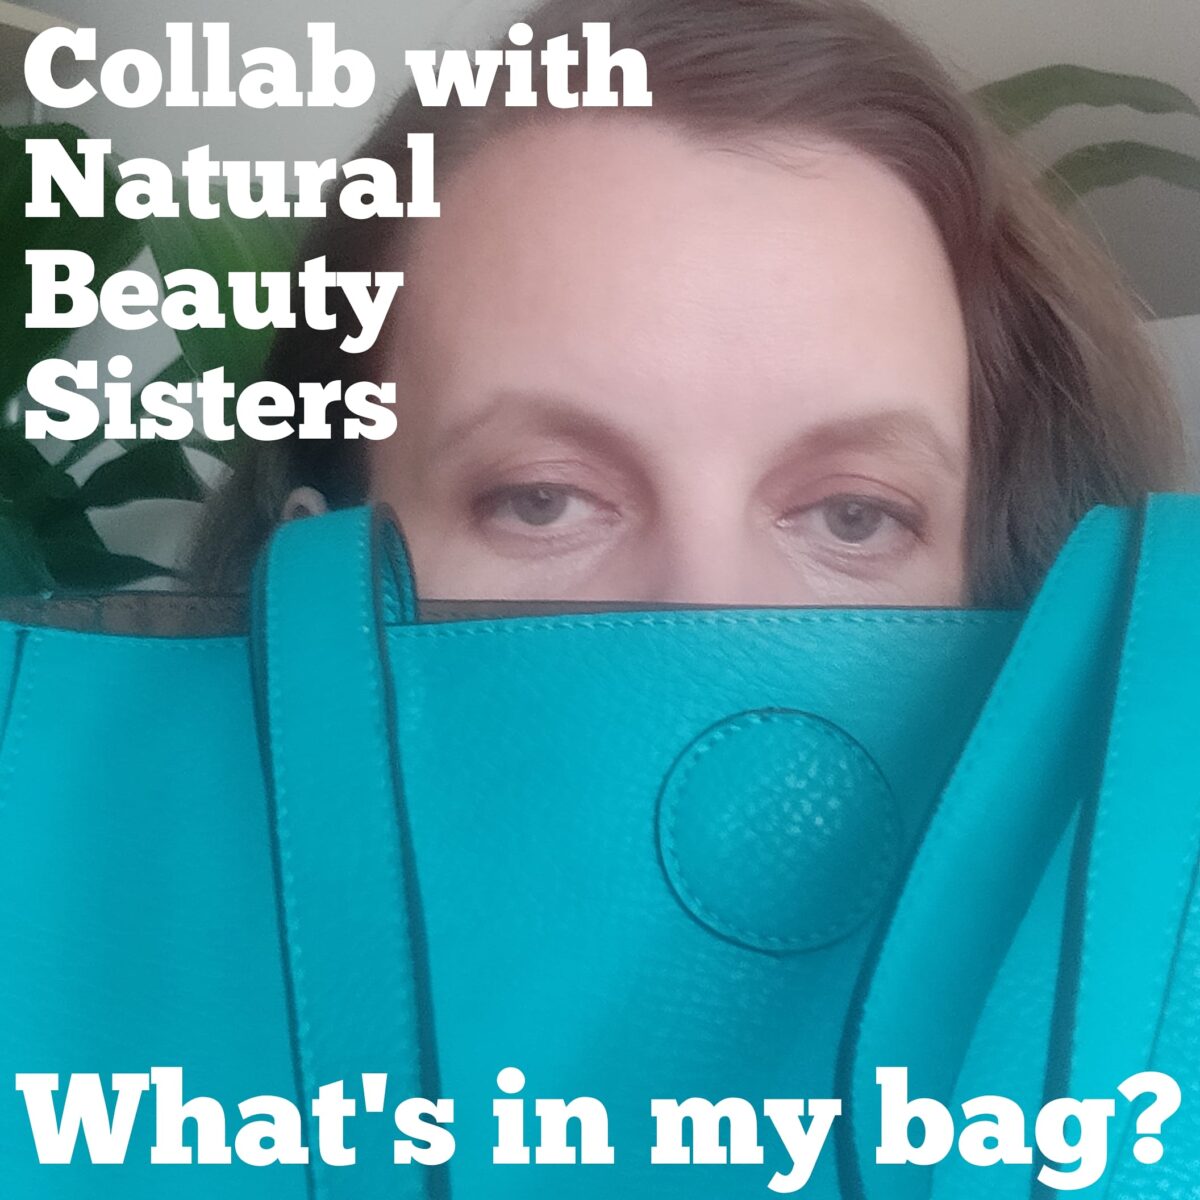 What’s In My Bag – YouTube Collaboration with Natural Beauty Sisters